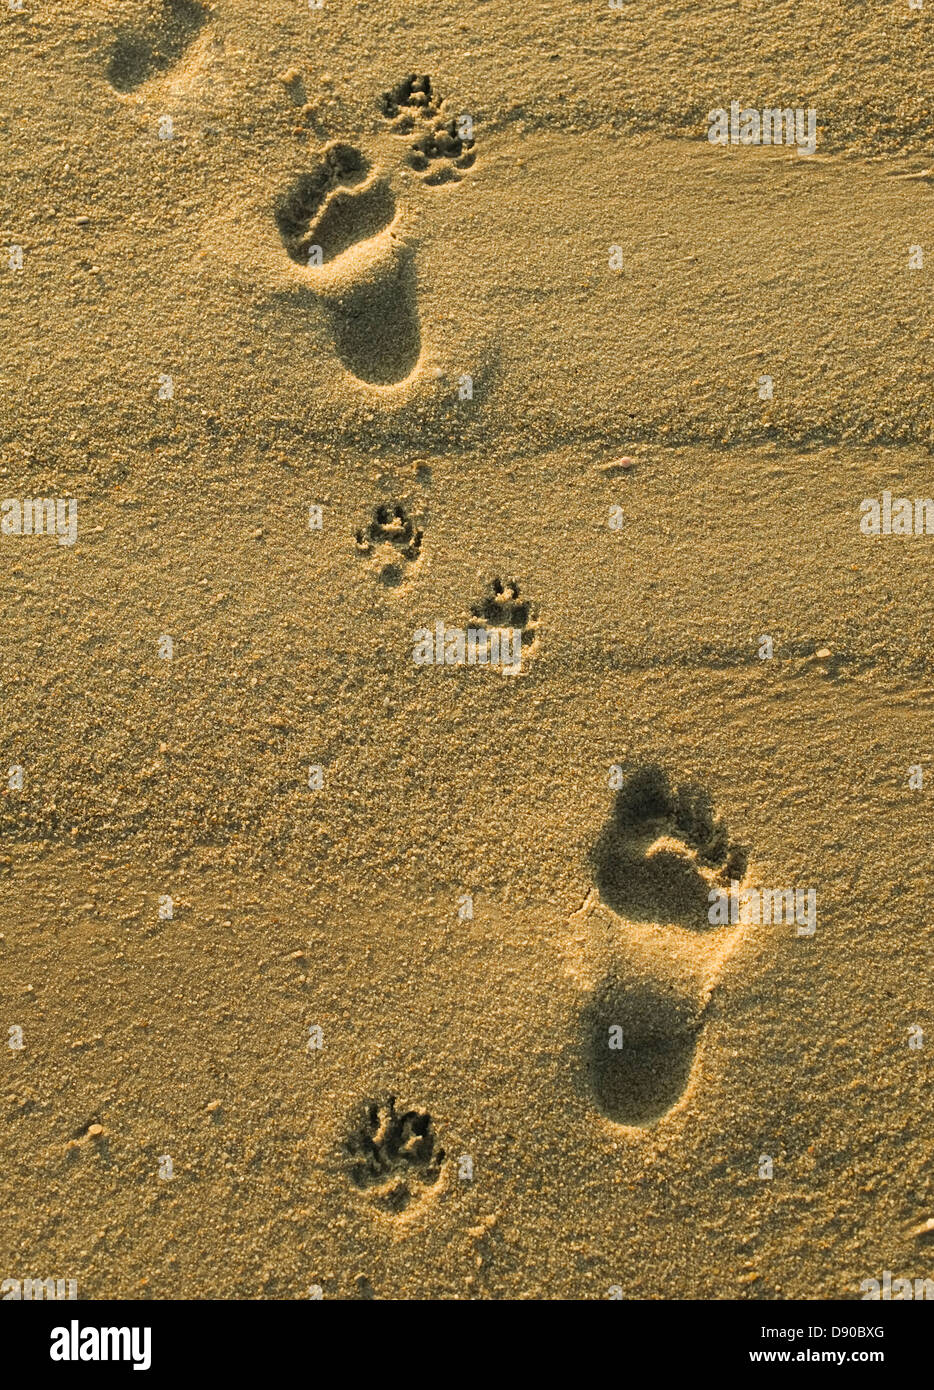 Human And Dog Footprints High Resolution Stock Photography and Images ...